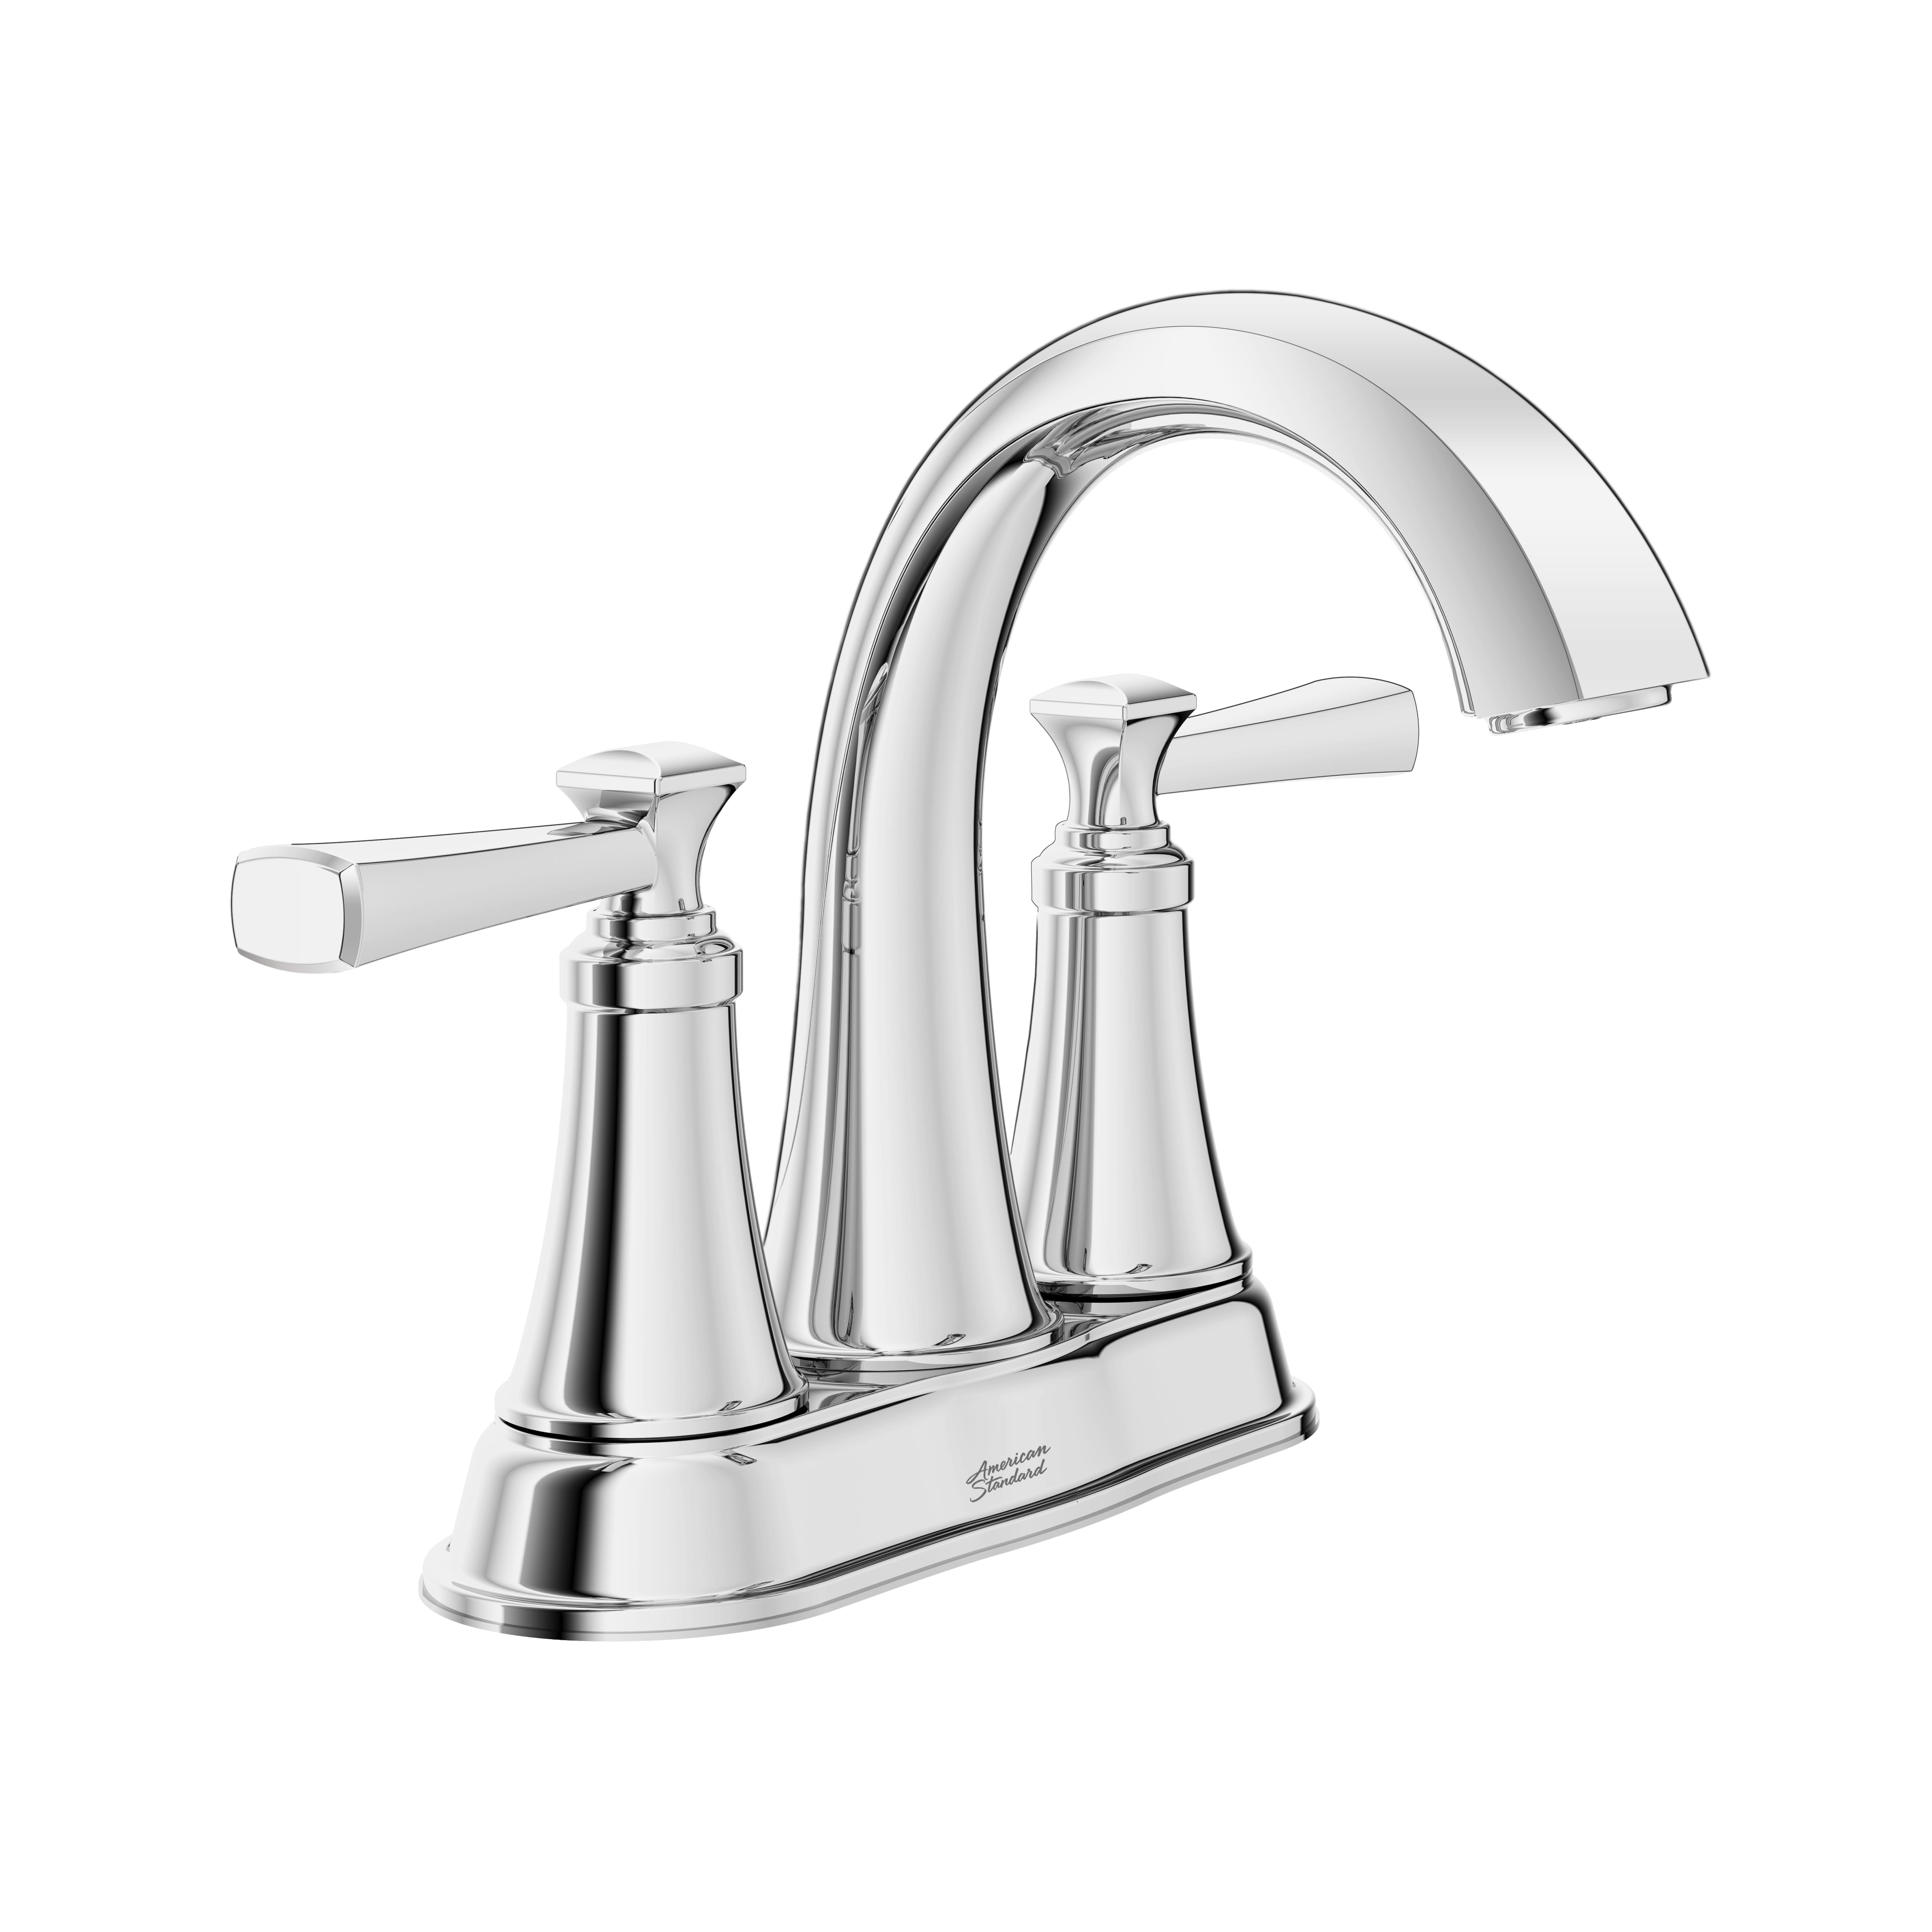 Rumson 4-In. Centerset 2-Handle Bathroom Faucet 1.2 GPM with Lever Handles